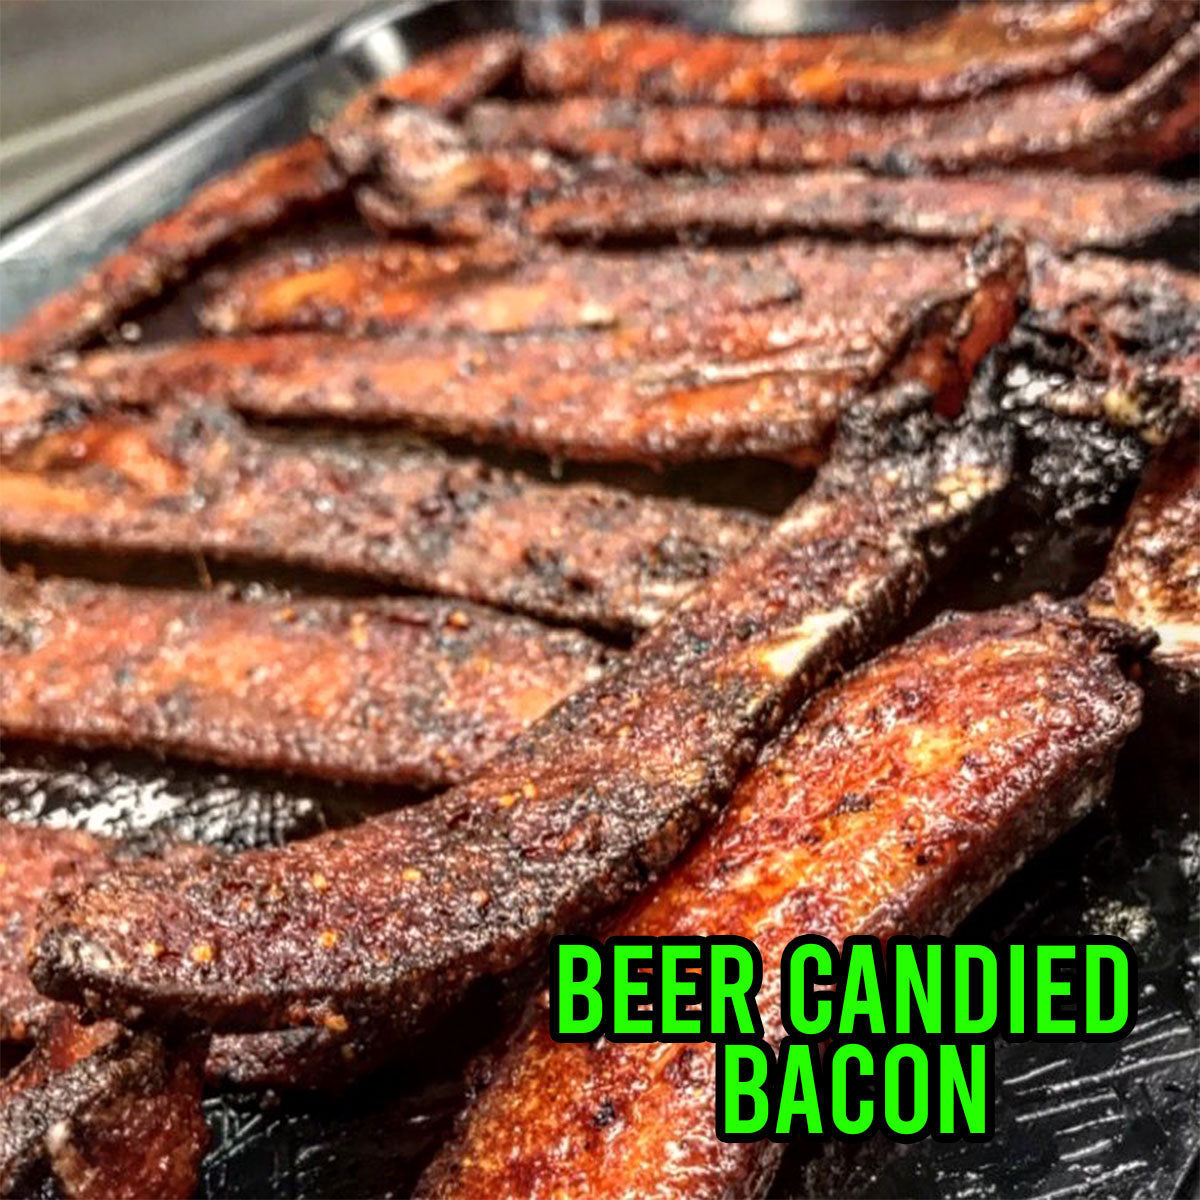 Beer Candied Bacon | Grill Your Ass Off